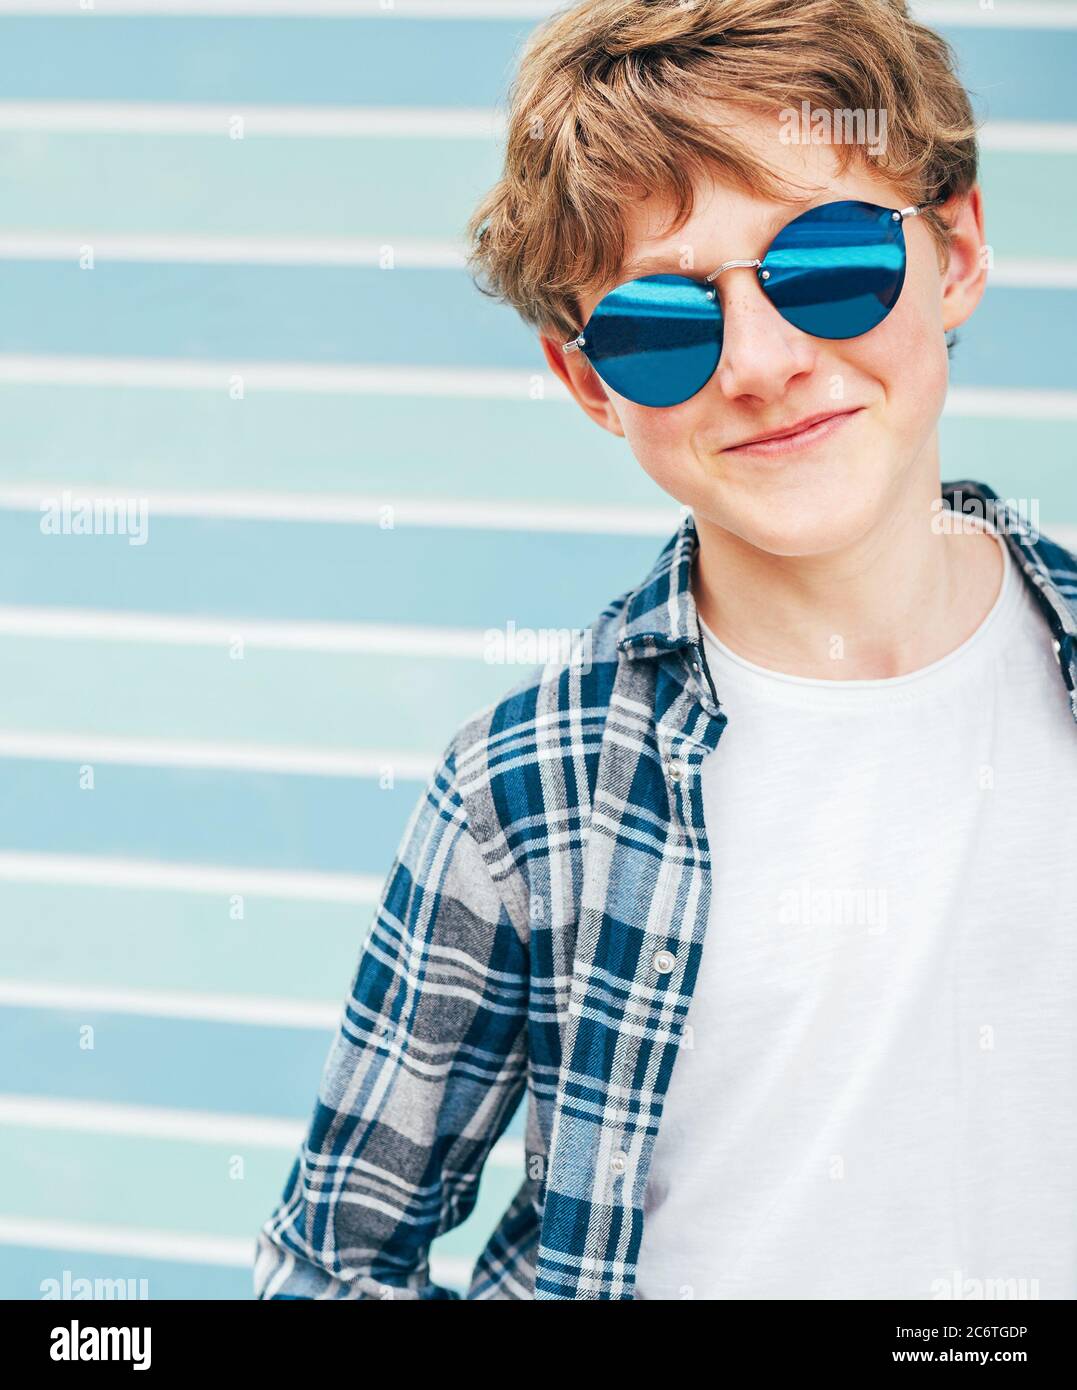 Blonde hair 12YO caucasian teenager boy Fashion portrait dressed white t-shirt with checkered shirt in blue sunglasses with turquoise blue background Stock Photo